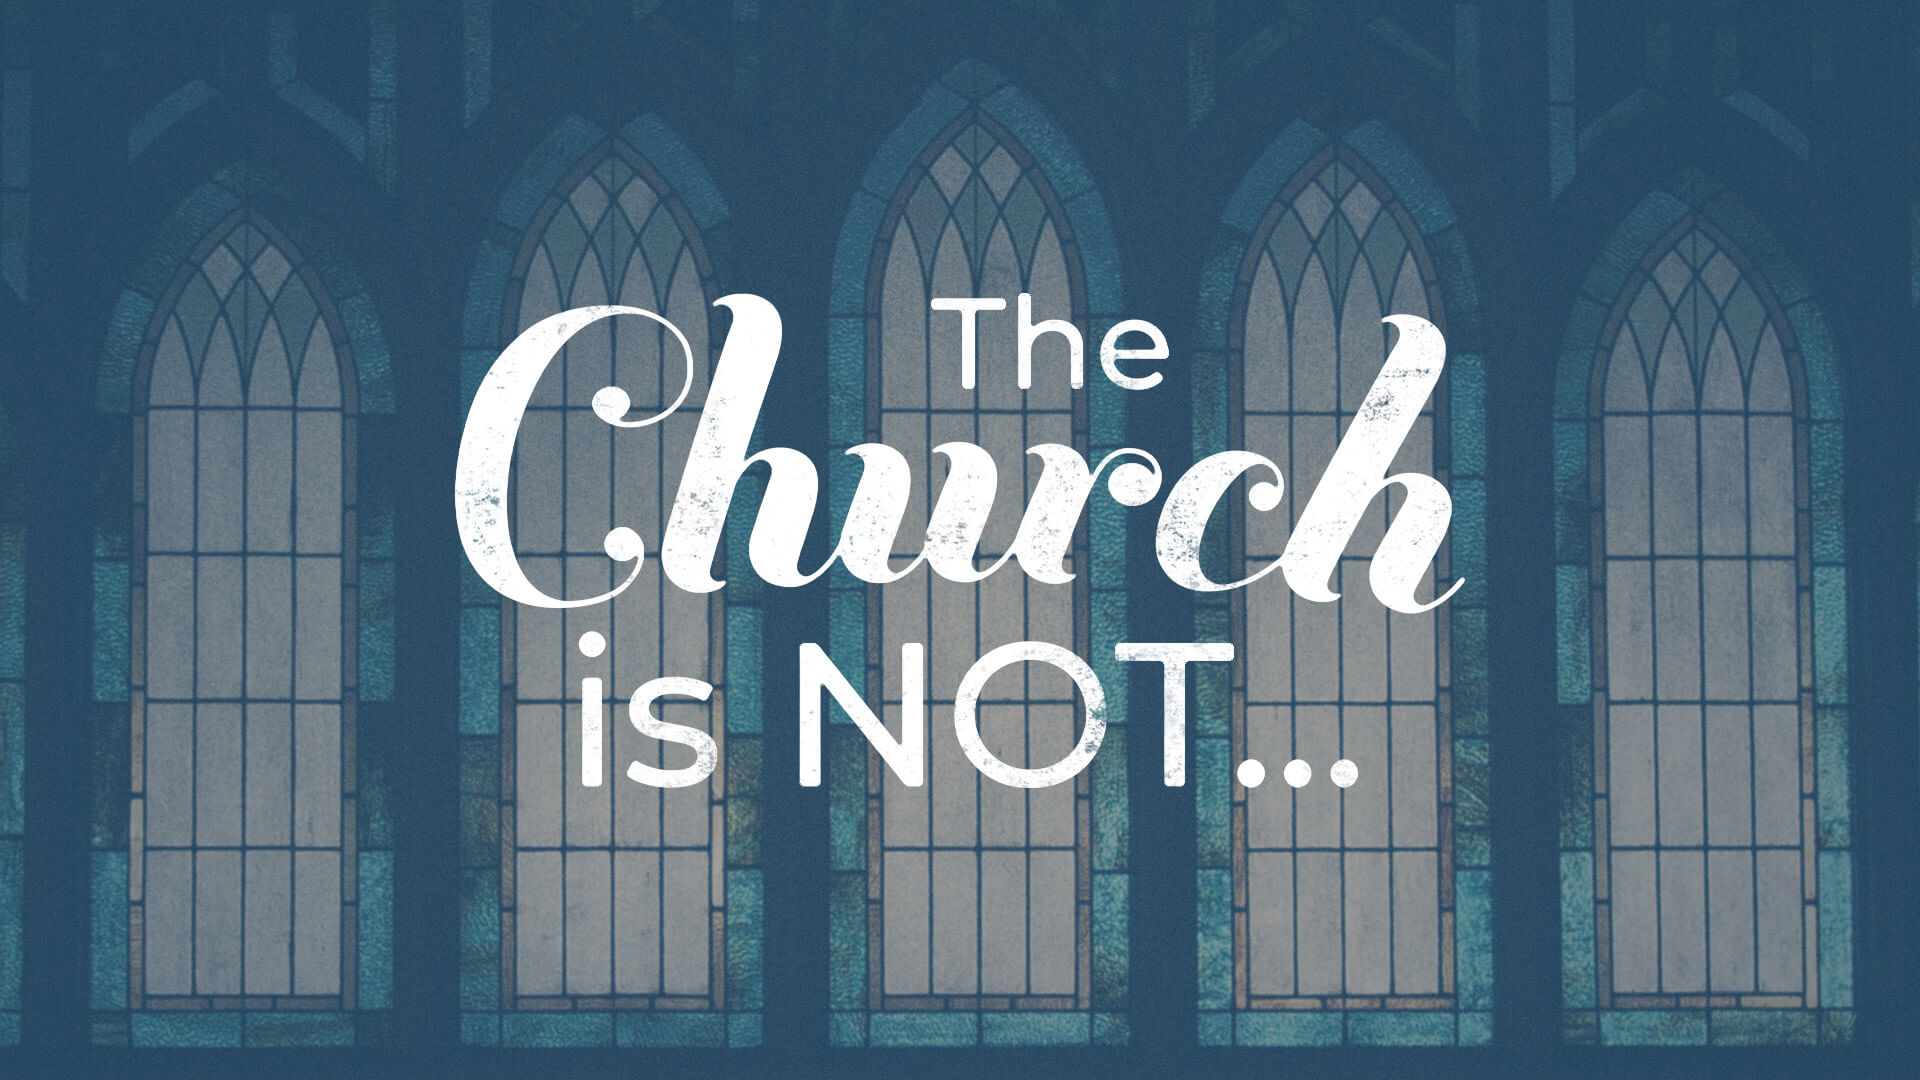 The Church Is NOT…